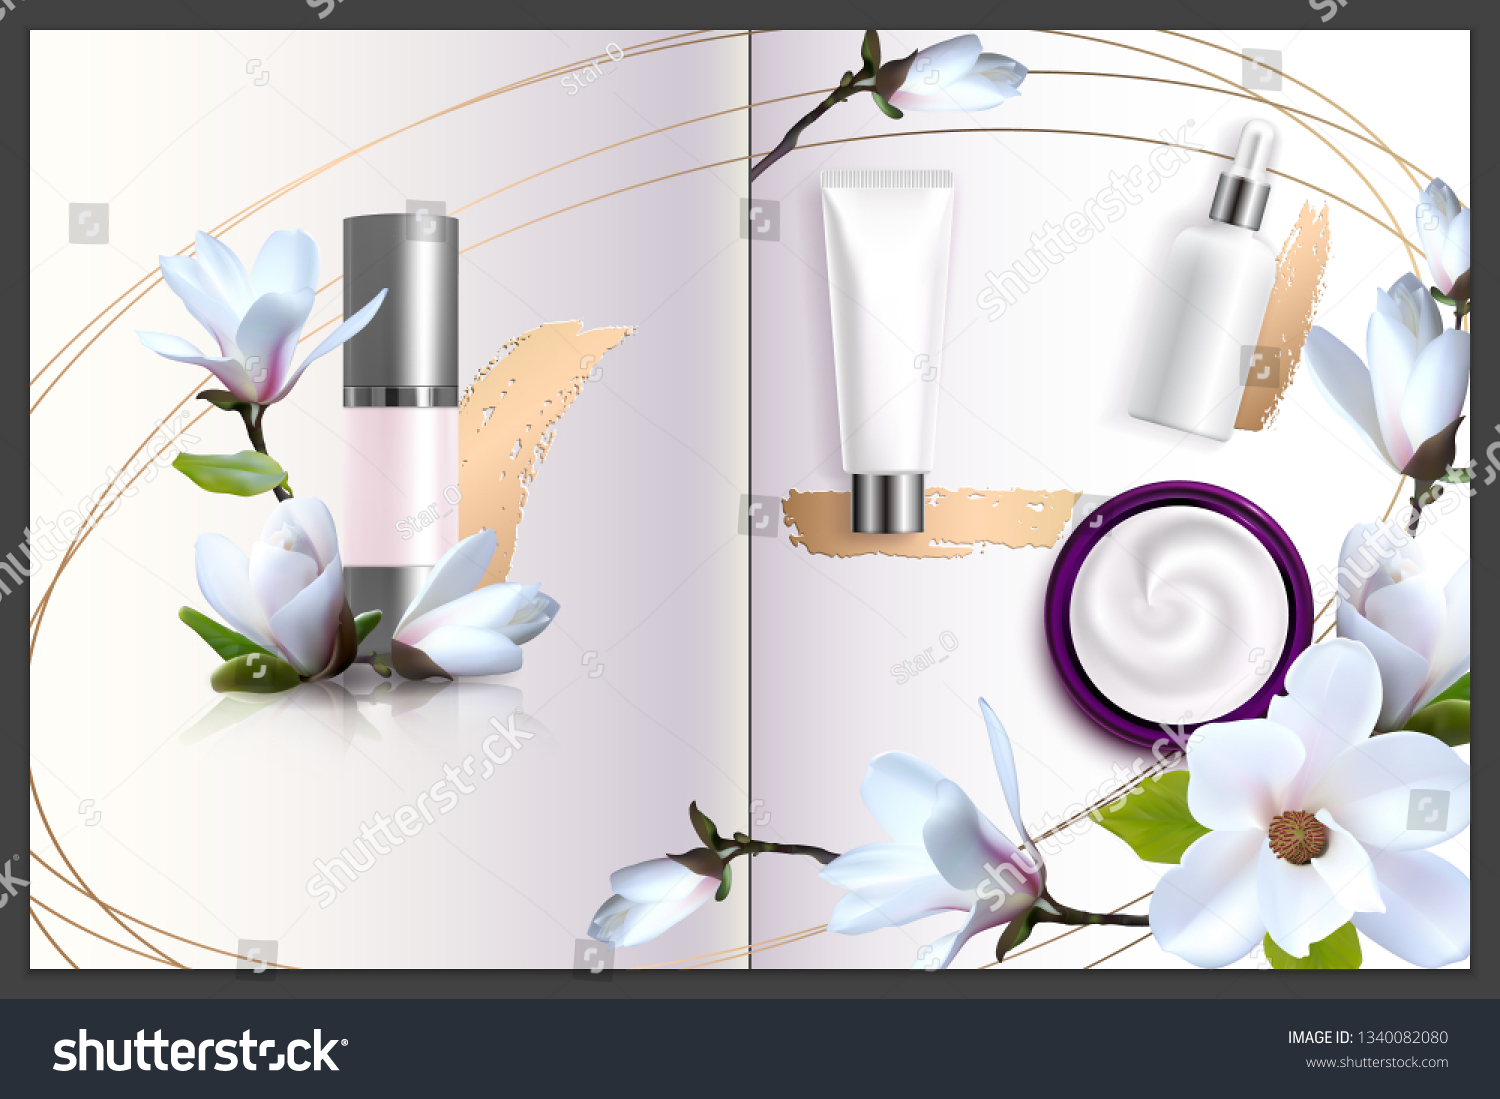 Advertising poster for cosmetic product with magnolia for catalog, magazine.Design of cosmetic package. Perfume advertising poster.Moisturizing toner, cream, gel, body lotion.Spring collection #1340082080